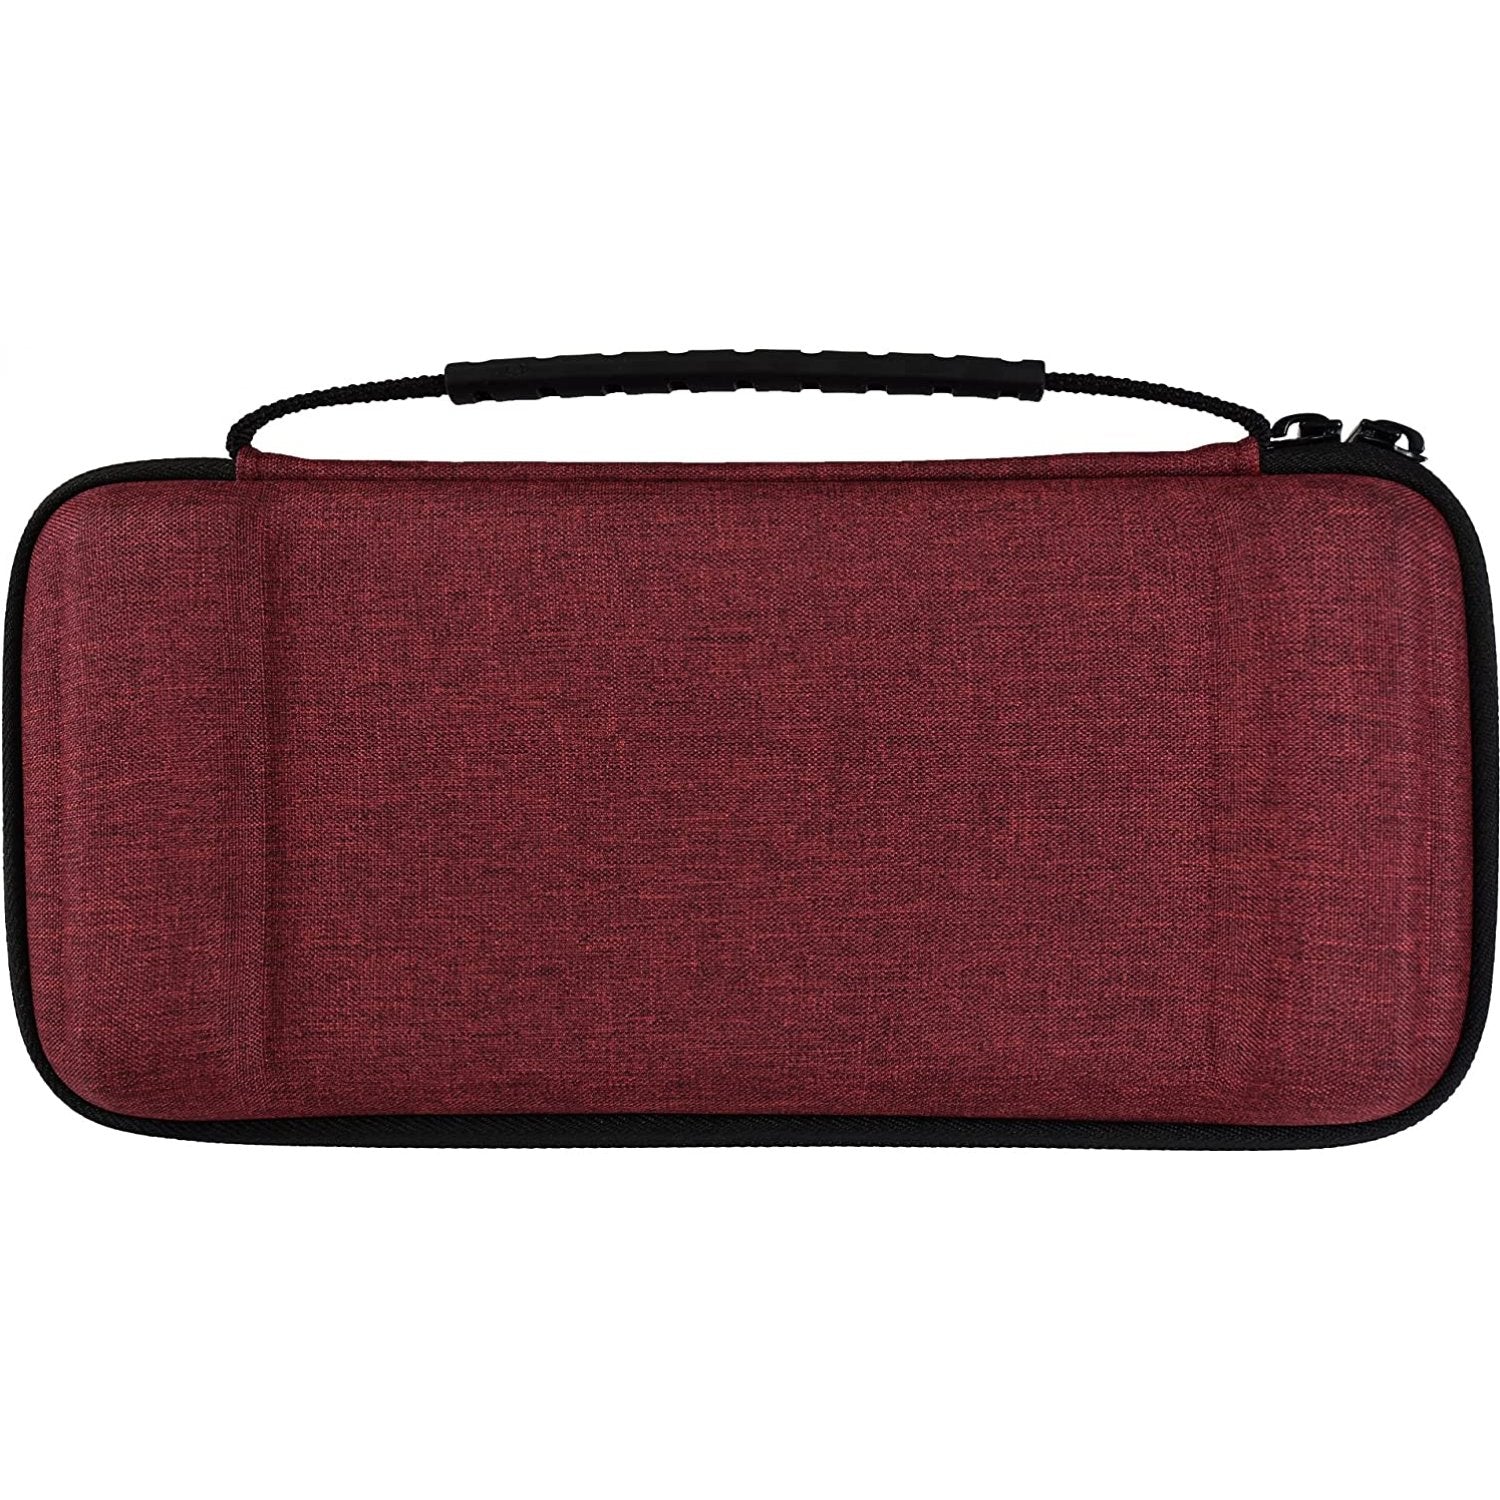 HORI NSW OLED Slim Tough Pouch Red (NSW-812)